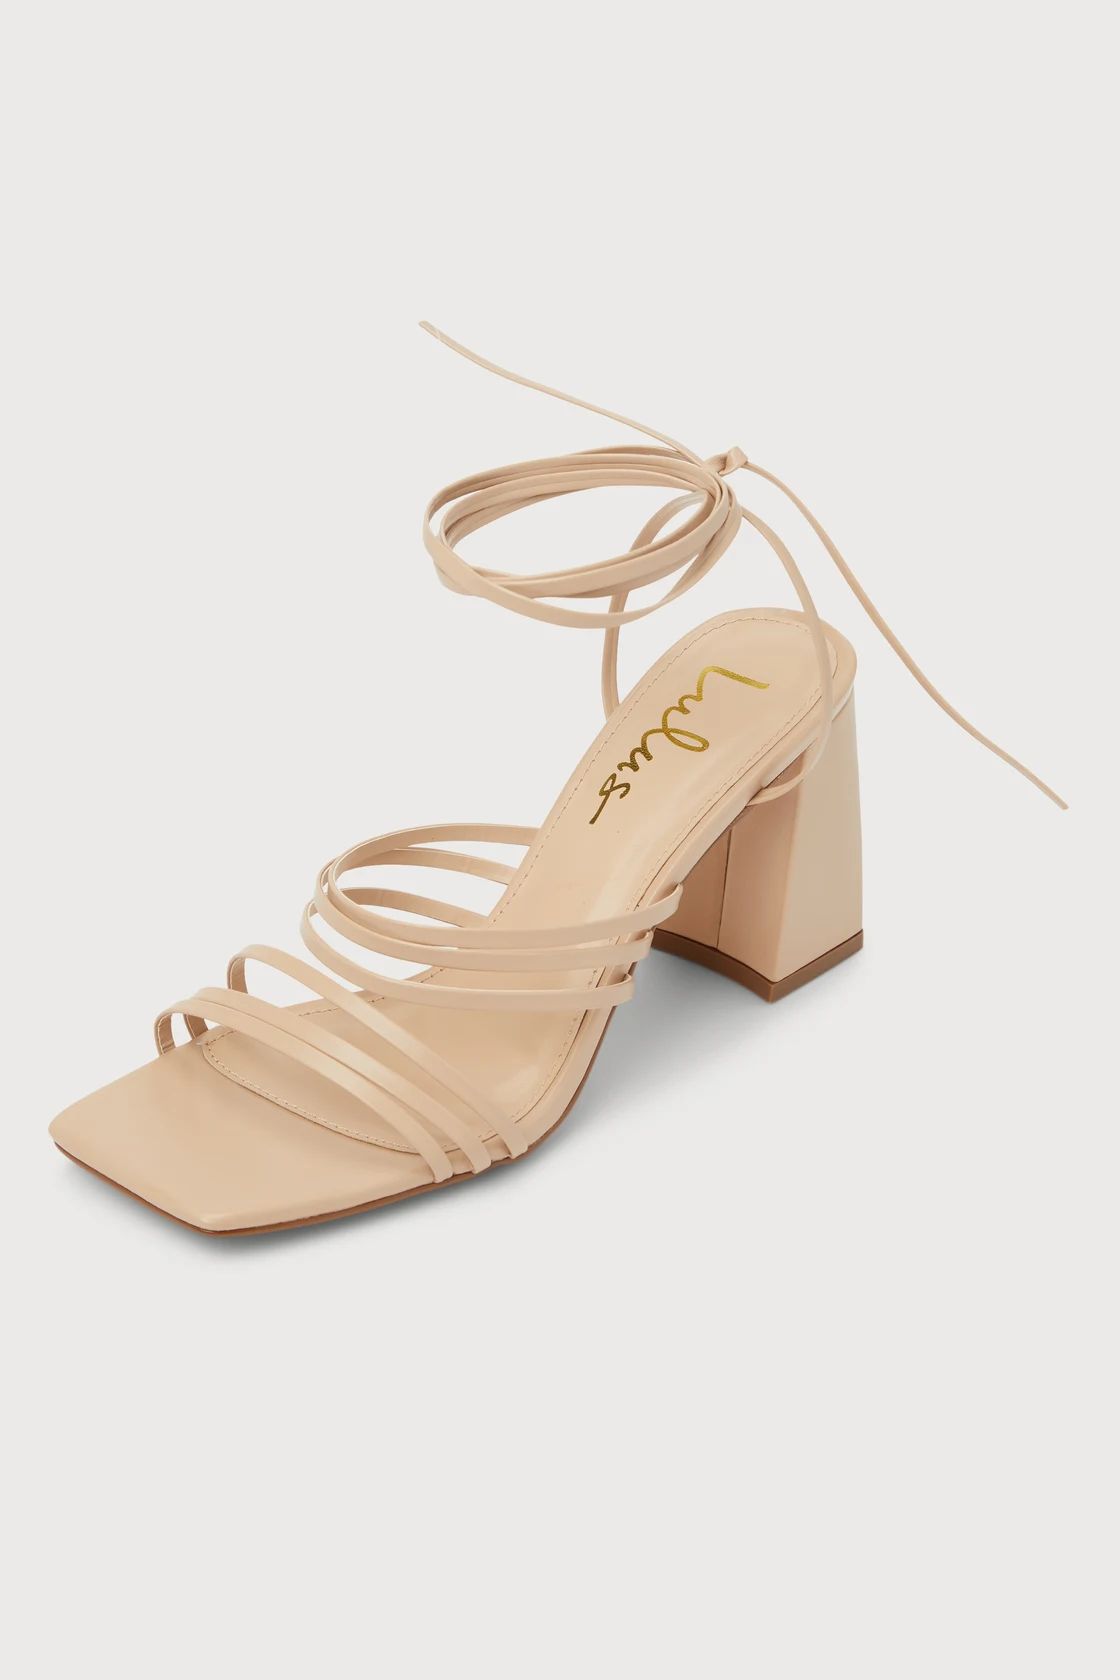 Arvid Light Nude Strappy Lace-Up High Heel Sandals | Lulus